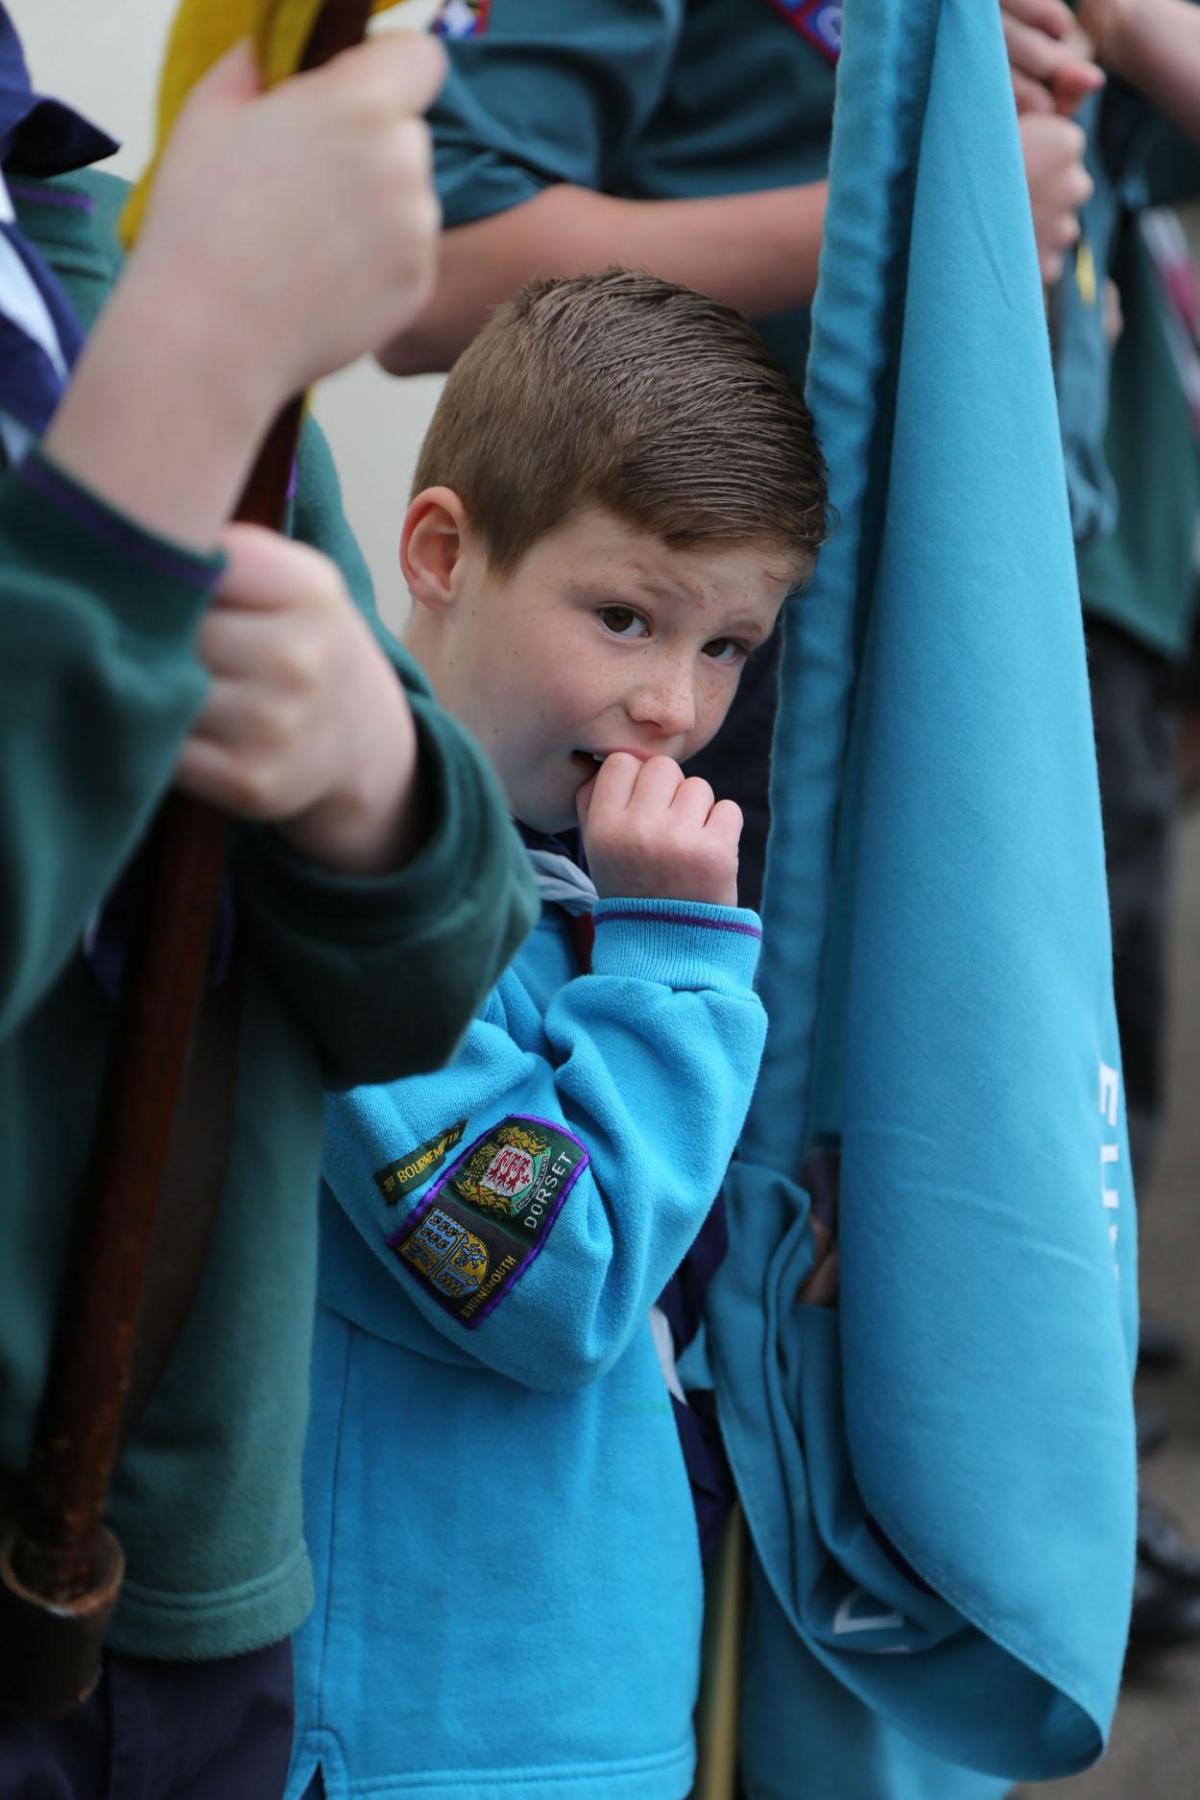 Pictures of the St George's Day scouts parade in Bournemouth by Corin Messer